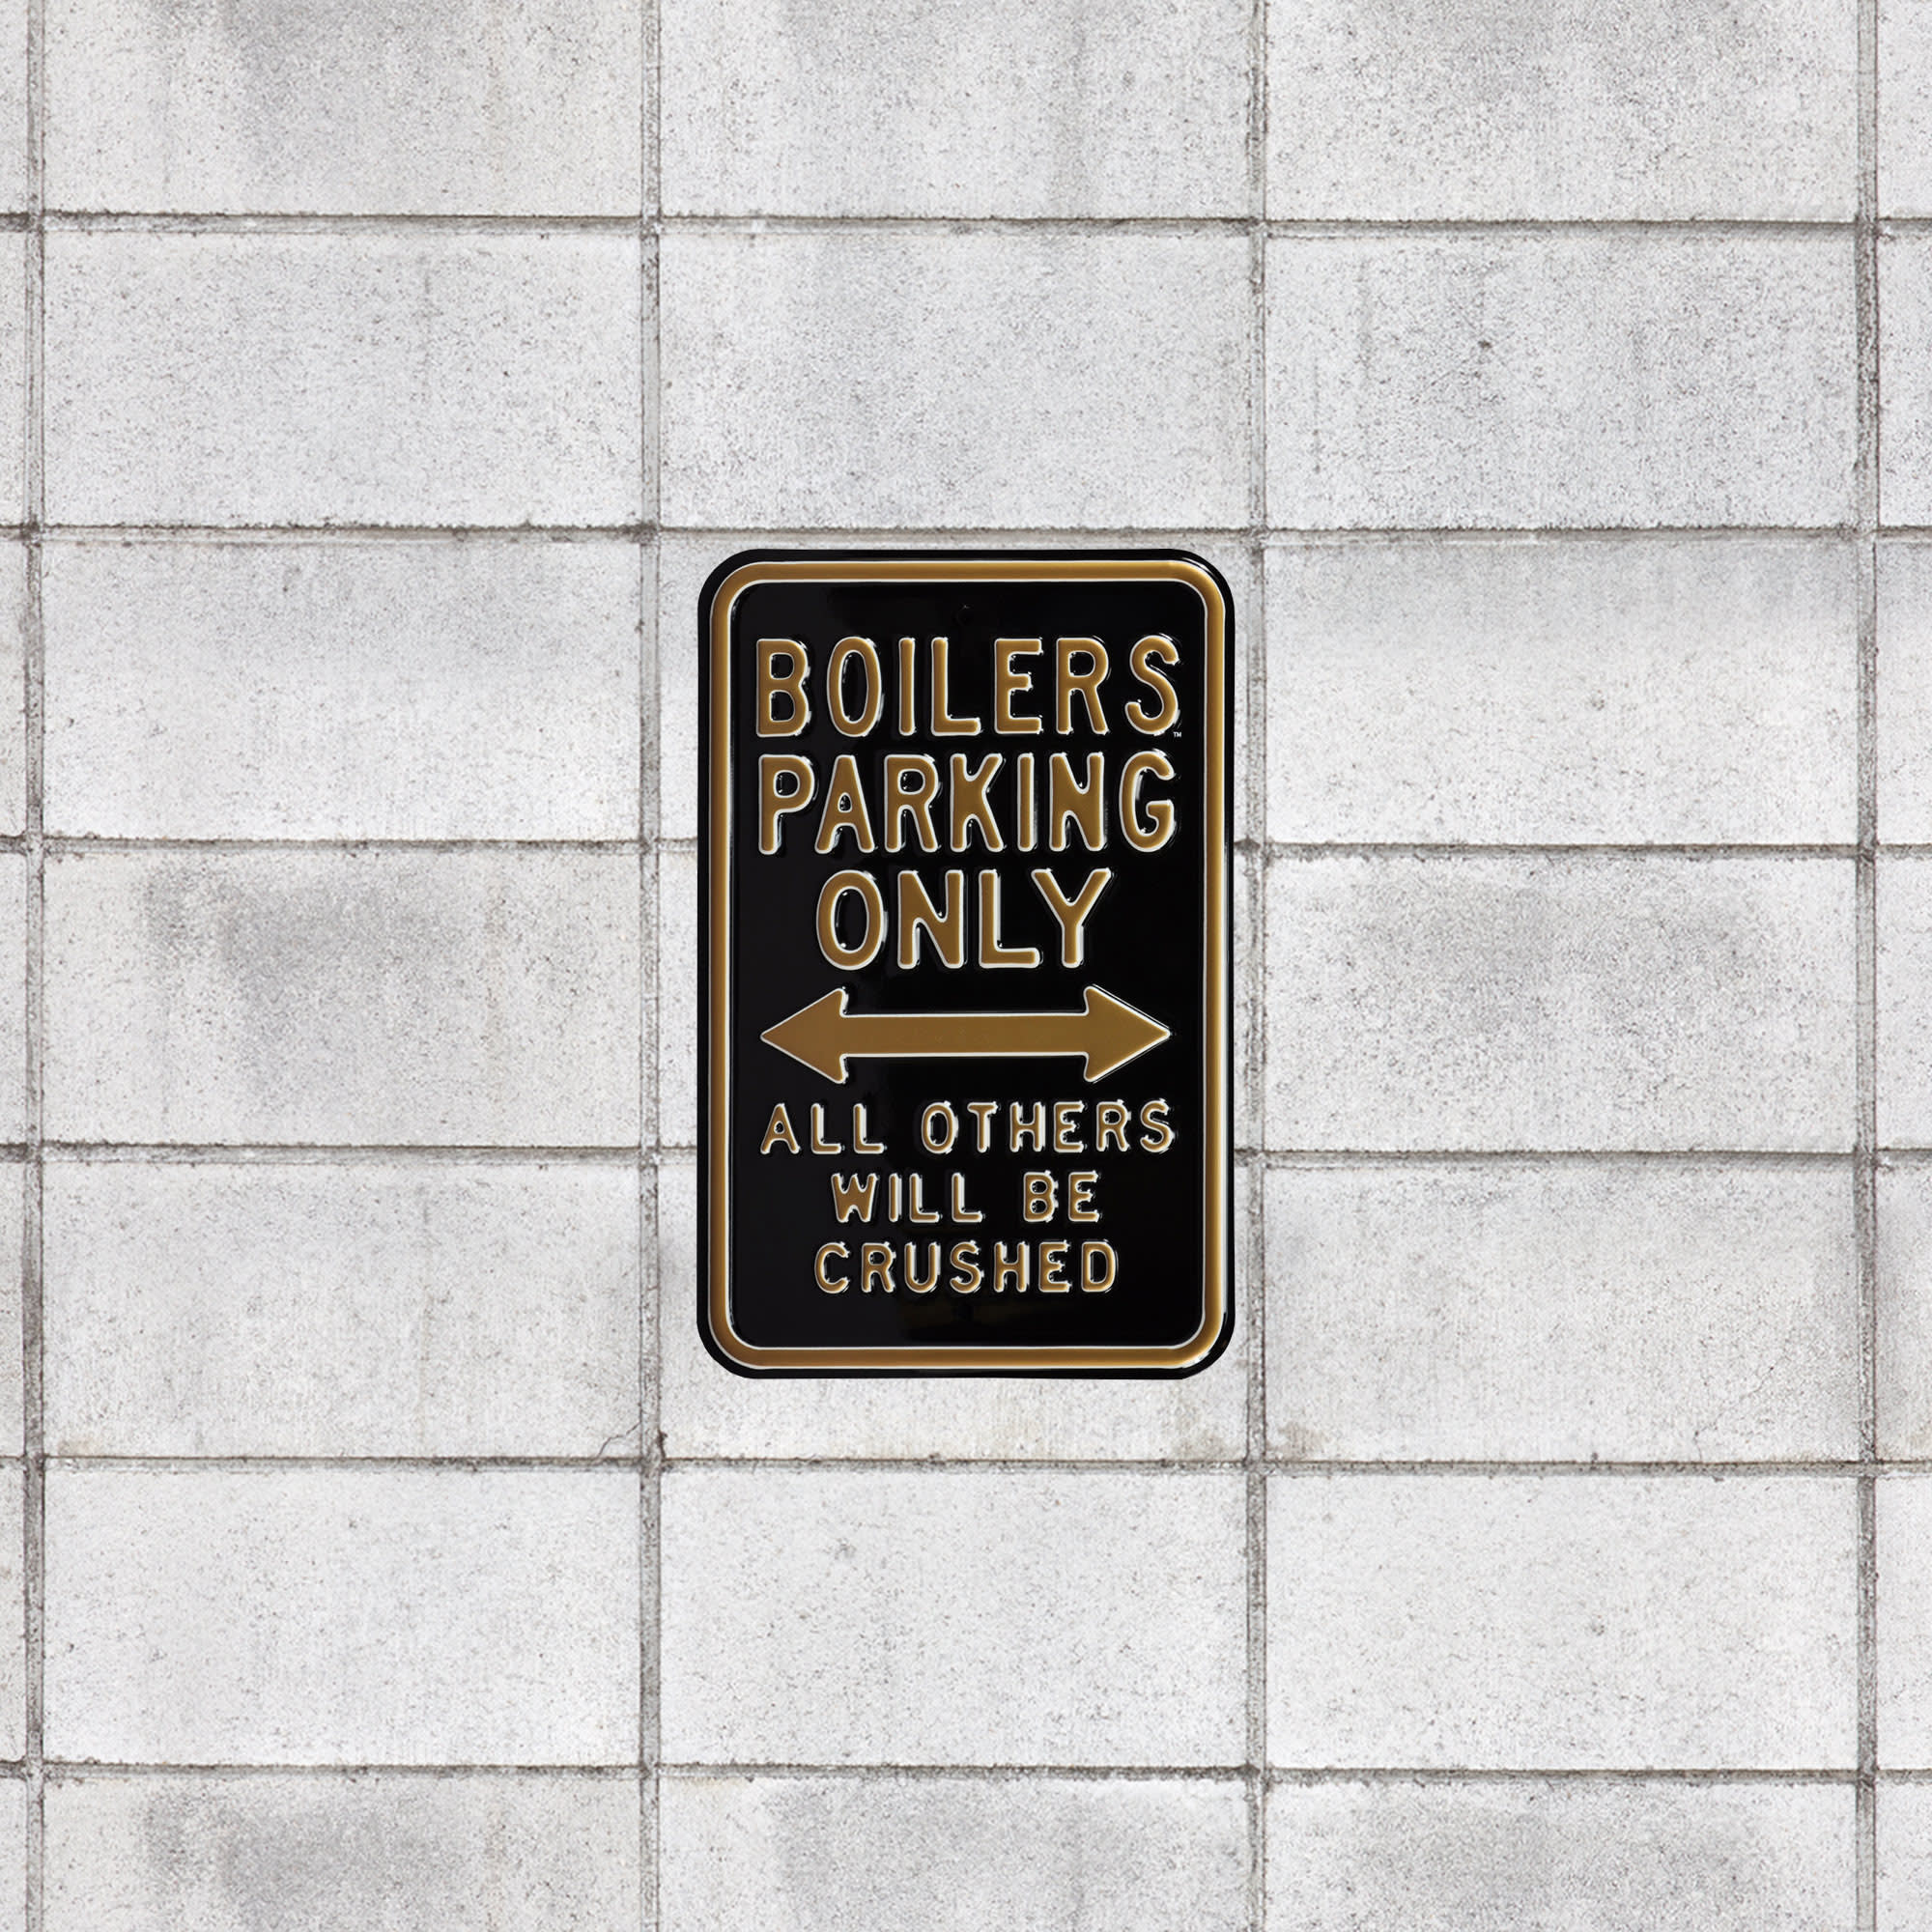 Purdue Boilermakers: Crushed Parking - Officially Licensed Metal Street Sign 18.0"W x 12.0"H by Fathead | 100% Steel